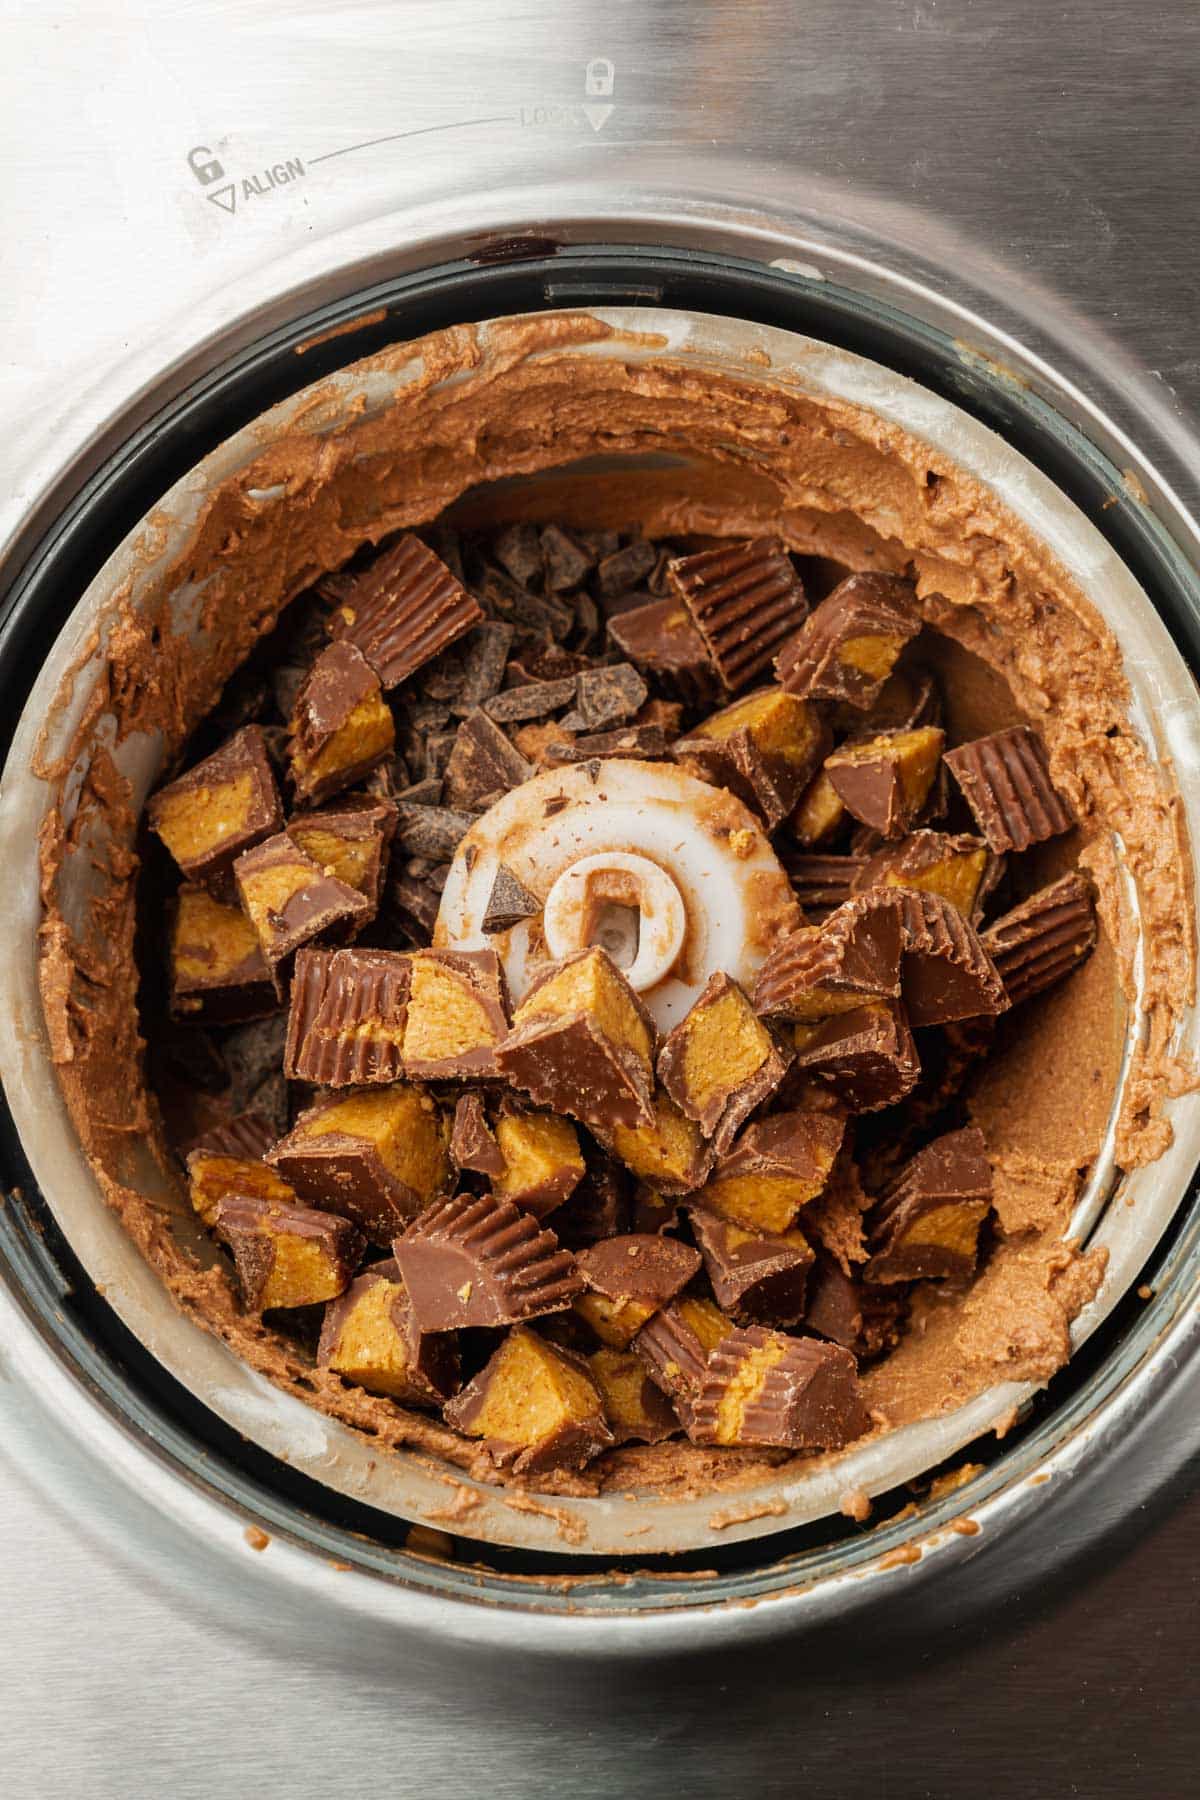 Chocolate ice cream topped with peanut butter cups in the bowl of an ice cream maker.